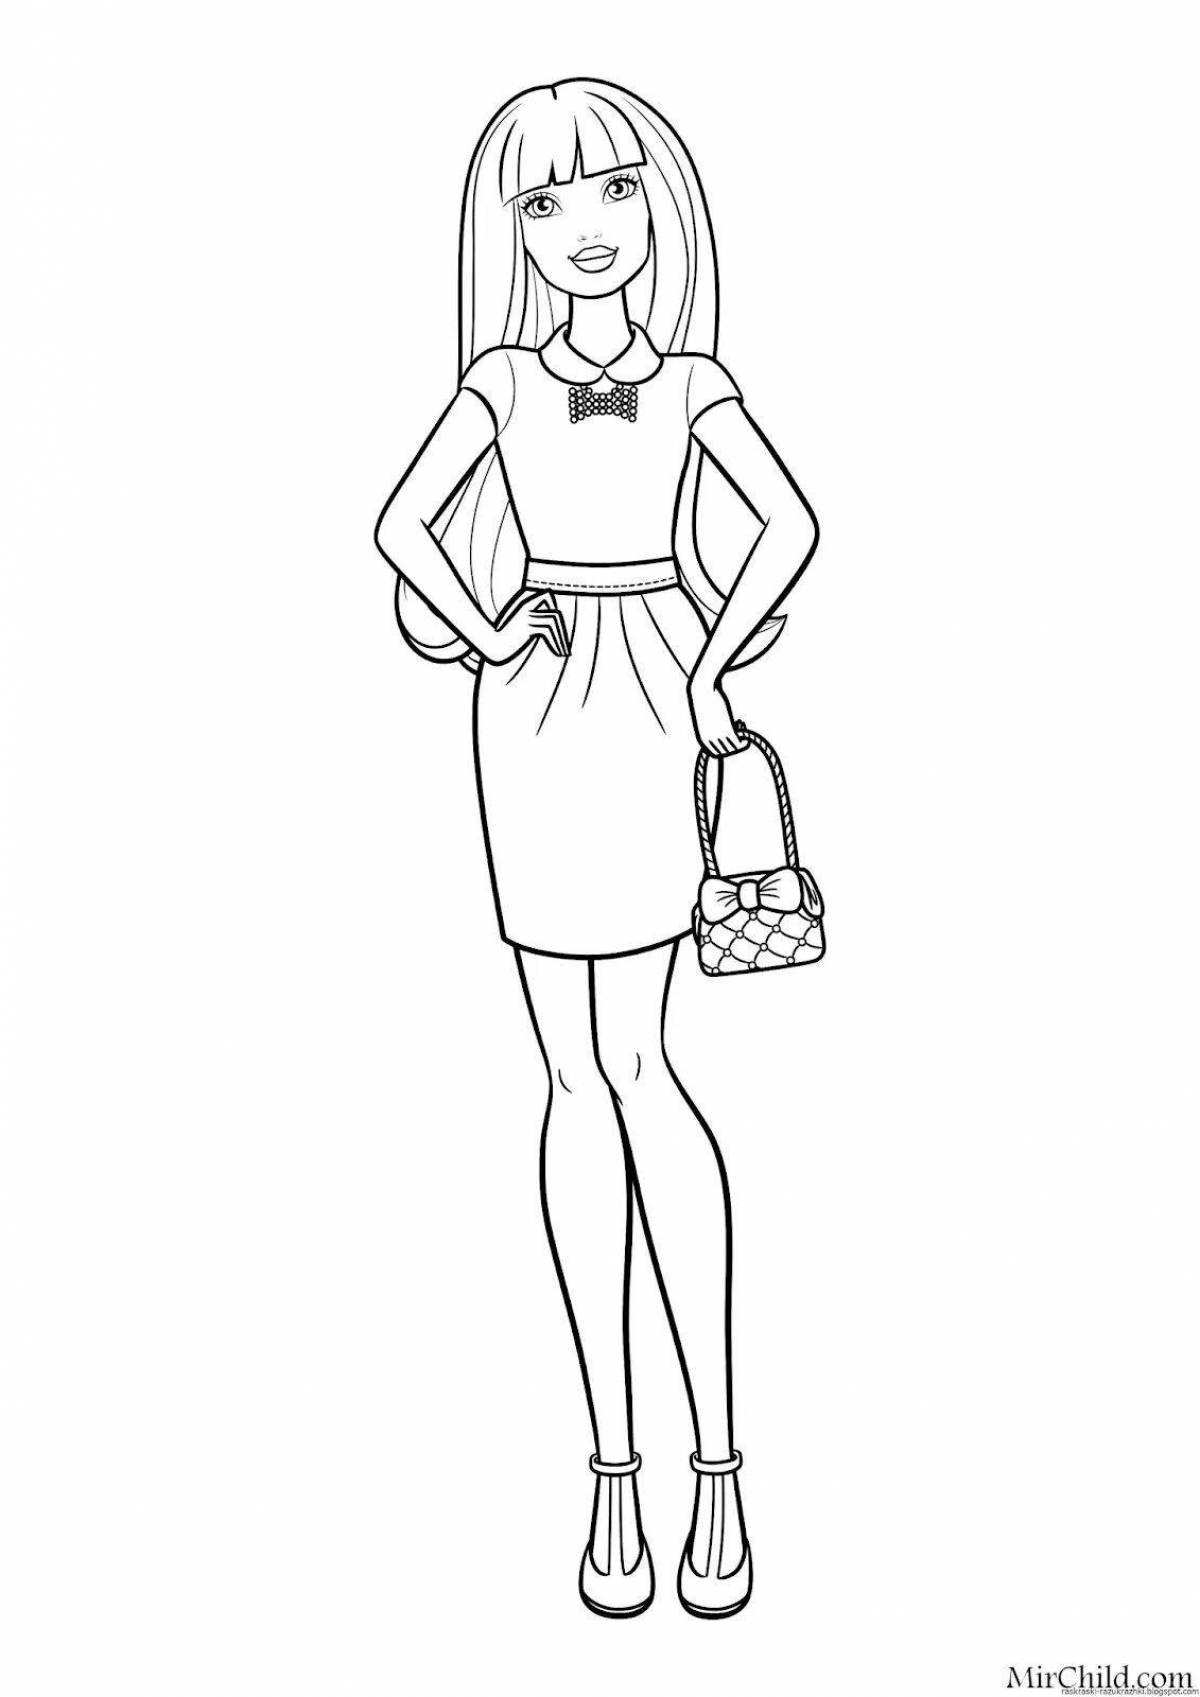 Friendly people coloring pages for girls